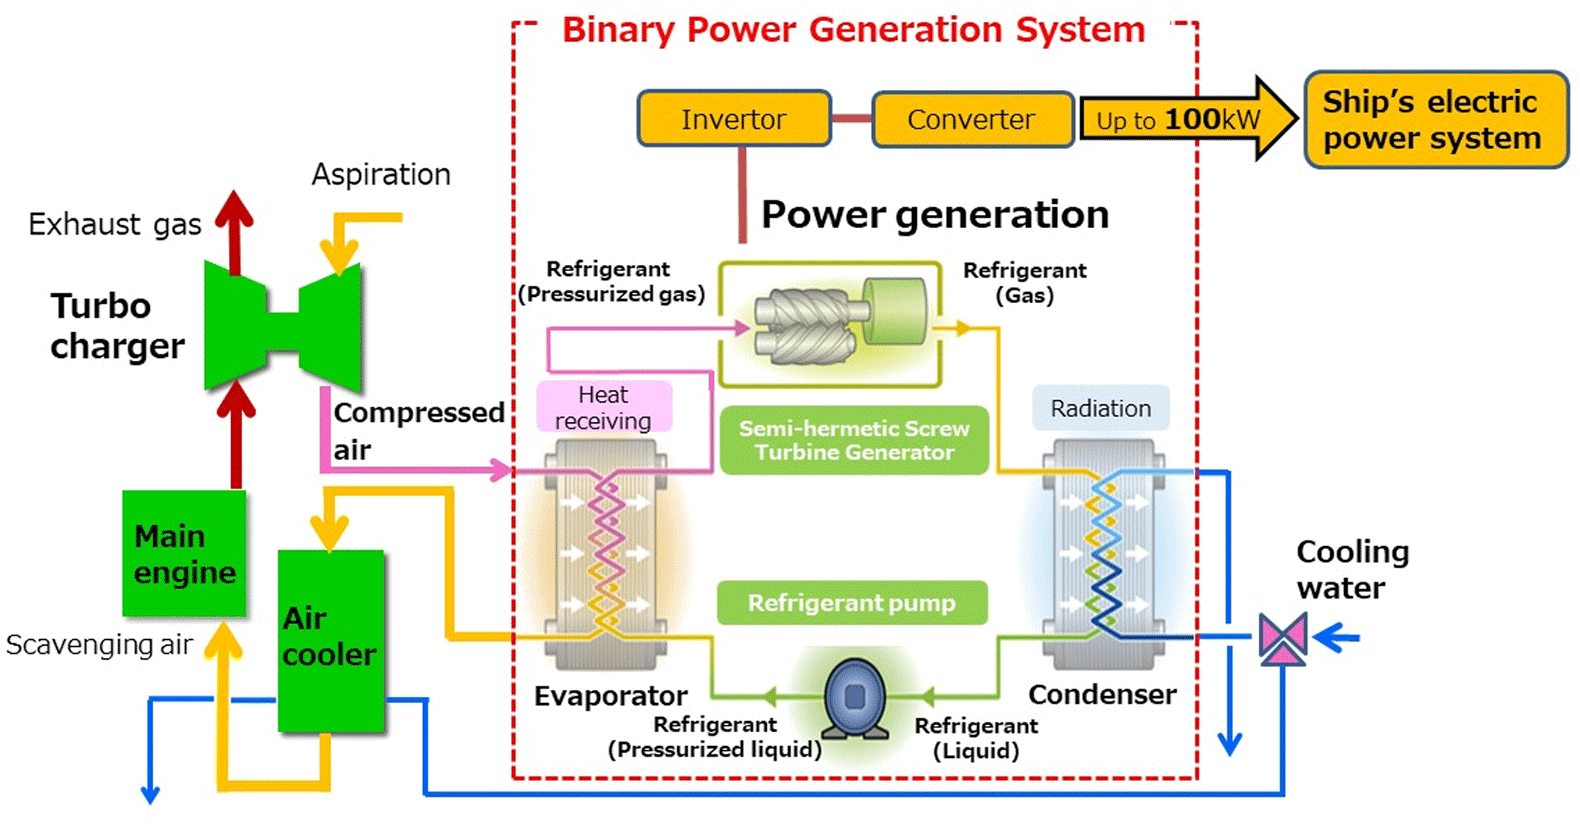 How the binary cycle power generation system works on a ship